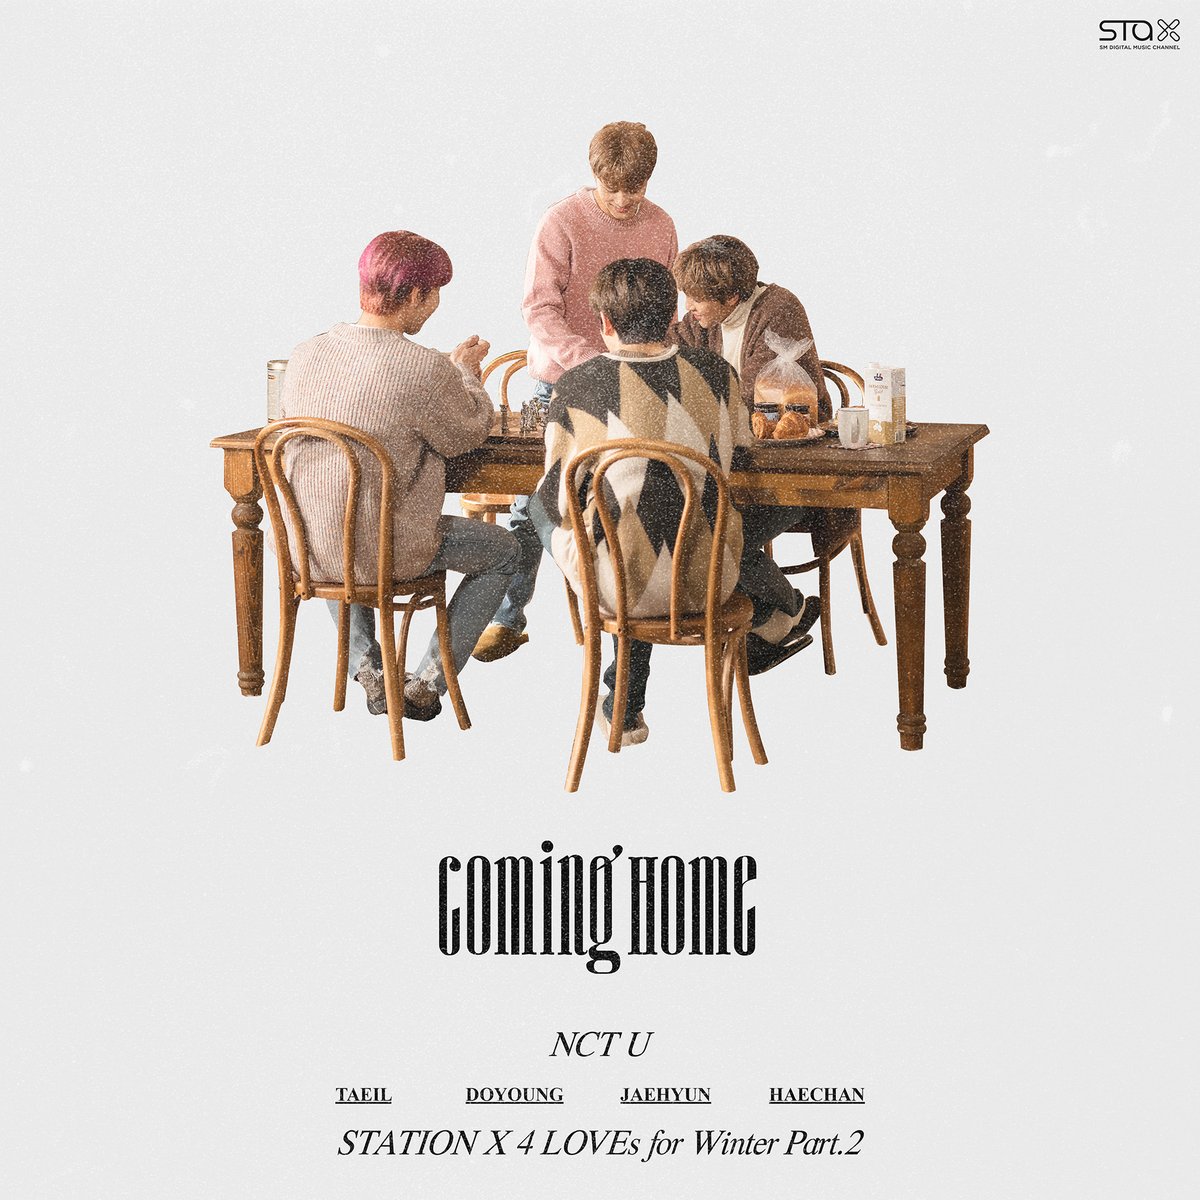 NCT U's ‘Coming Home’, the 2nd song of ‘STATION X 4 LOVEs for Winter’, will be released today at 6PM KST!
Stay tuned for the heartwarming winter ballad & its MV where TAEIL, DOYOUNG, JAEHYUN, & HAECHAN sing of the gratefulness & love to a lover who waits for them no matter what!